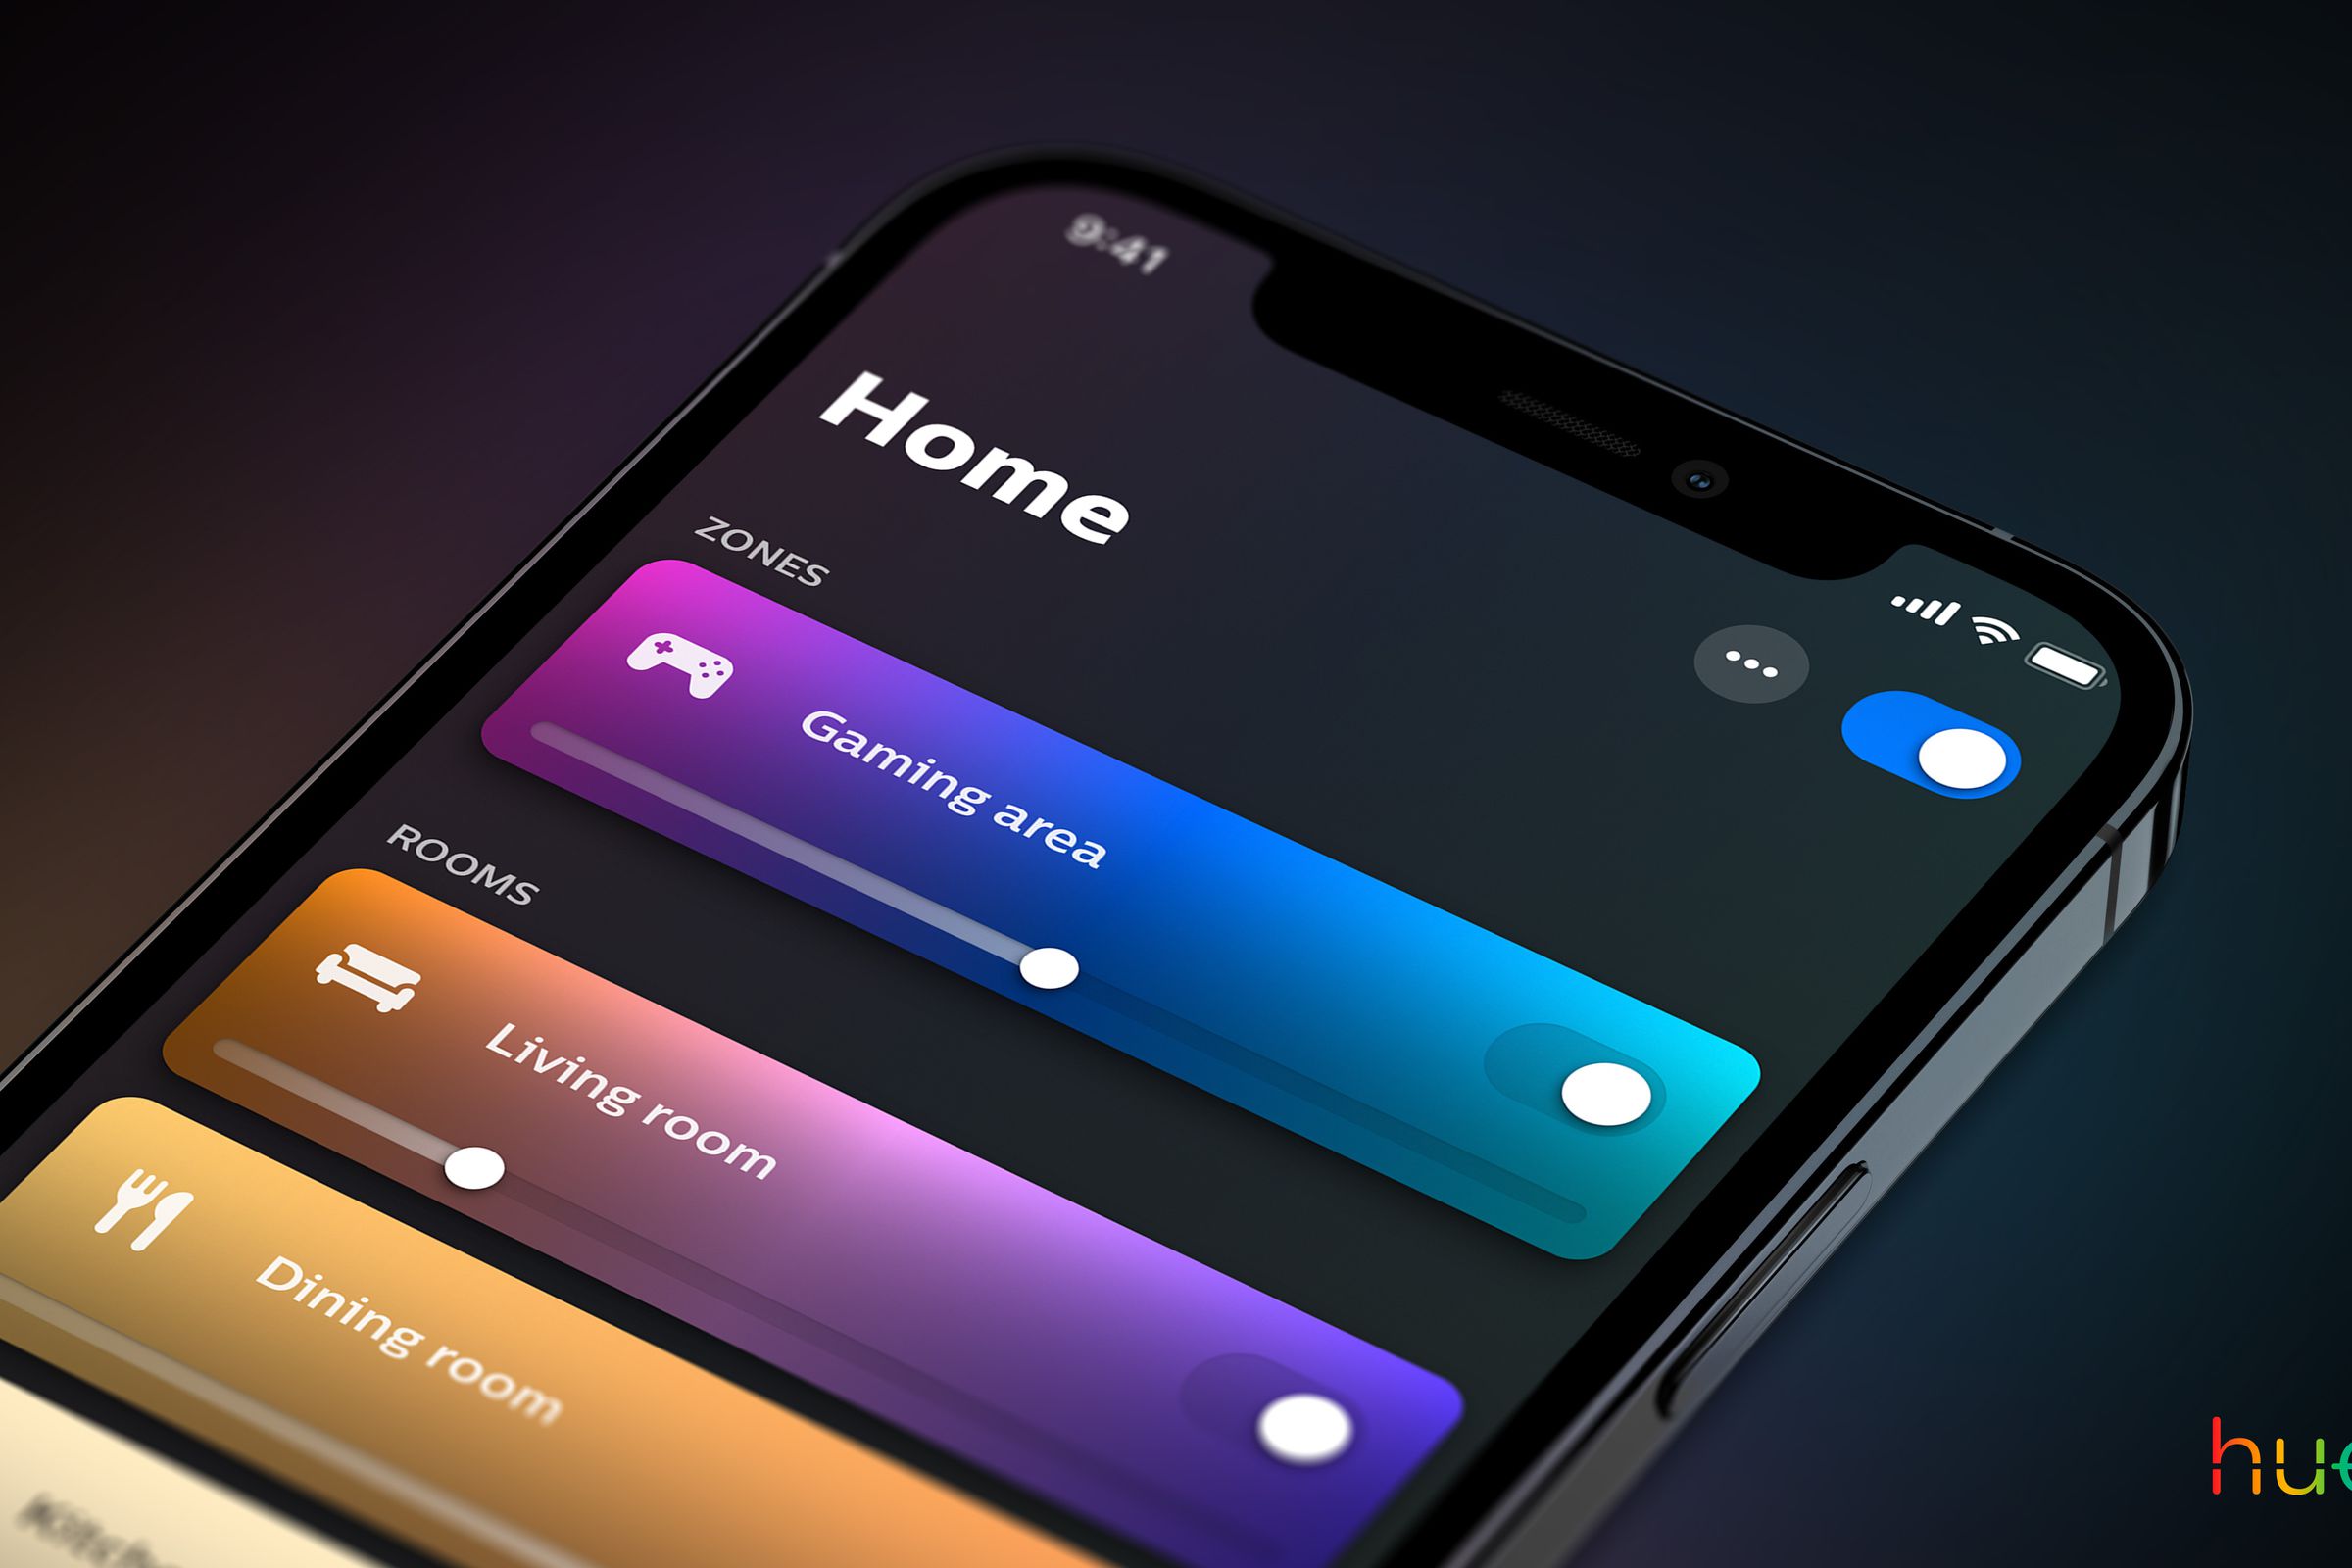 The Home screen of the updated Hue app.